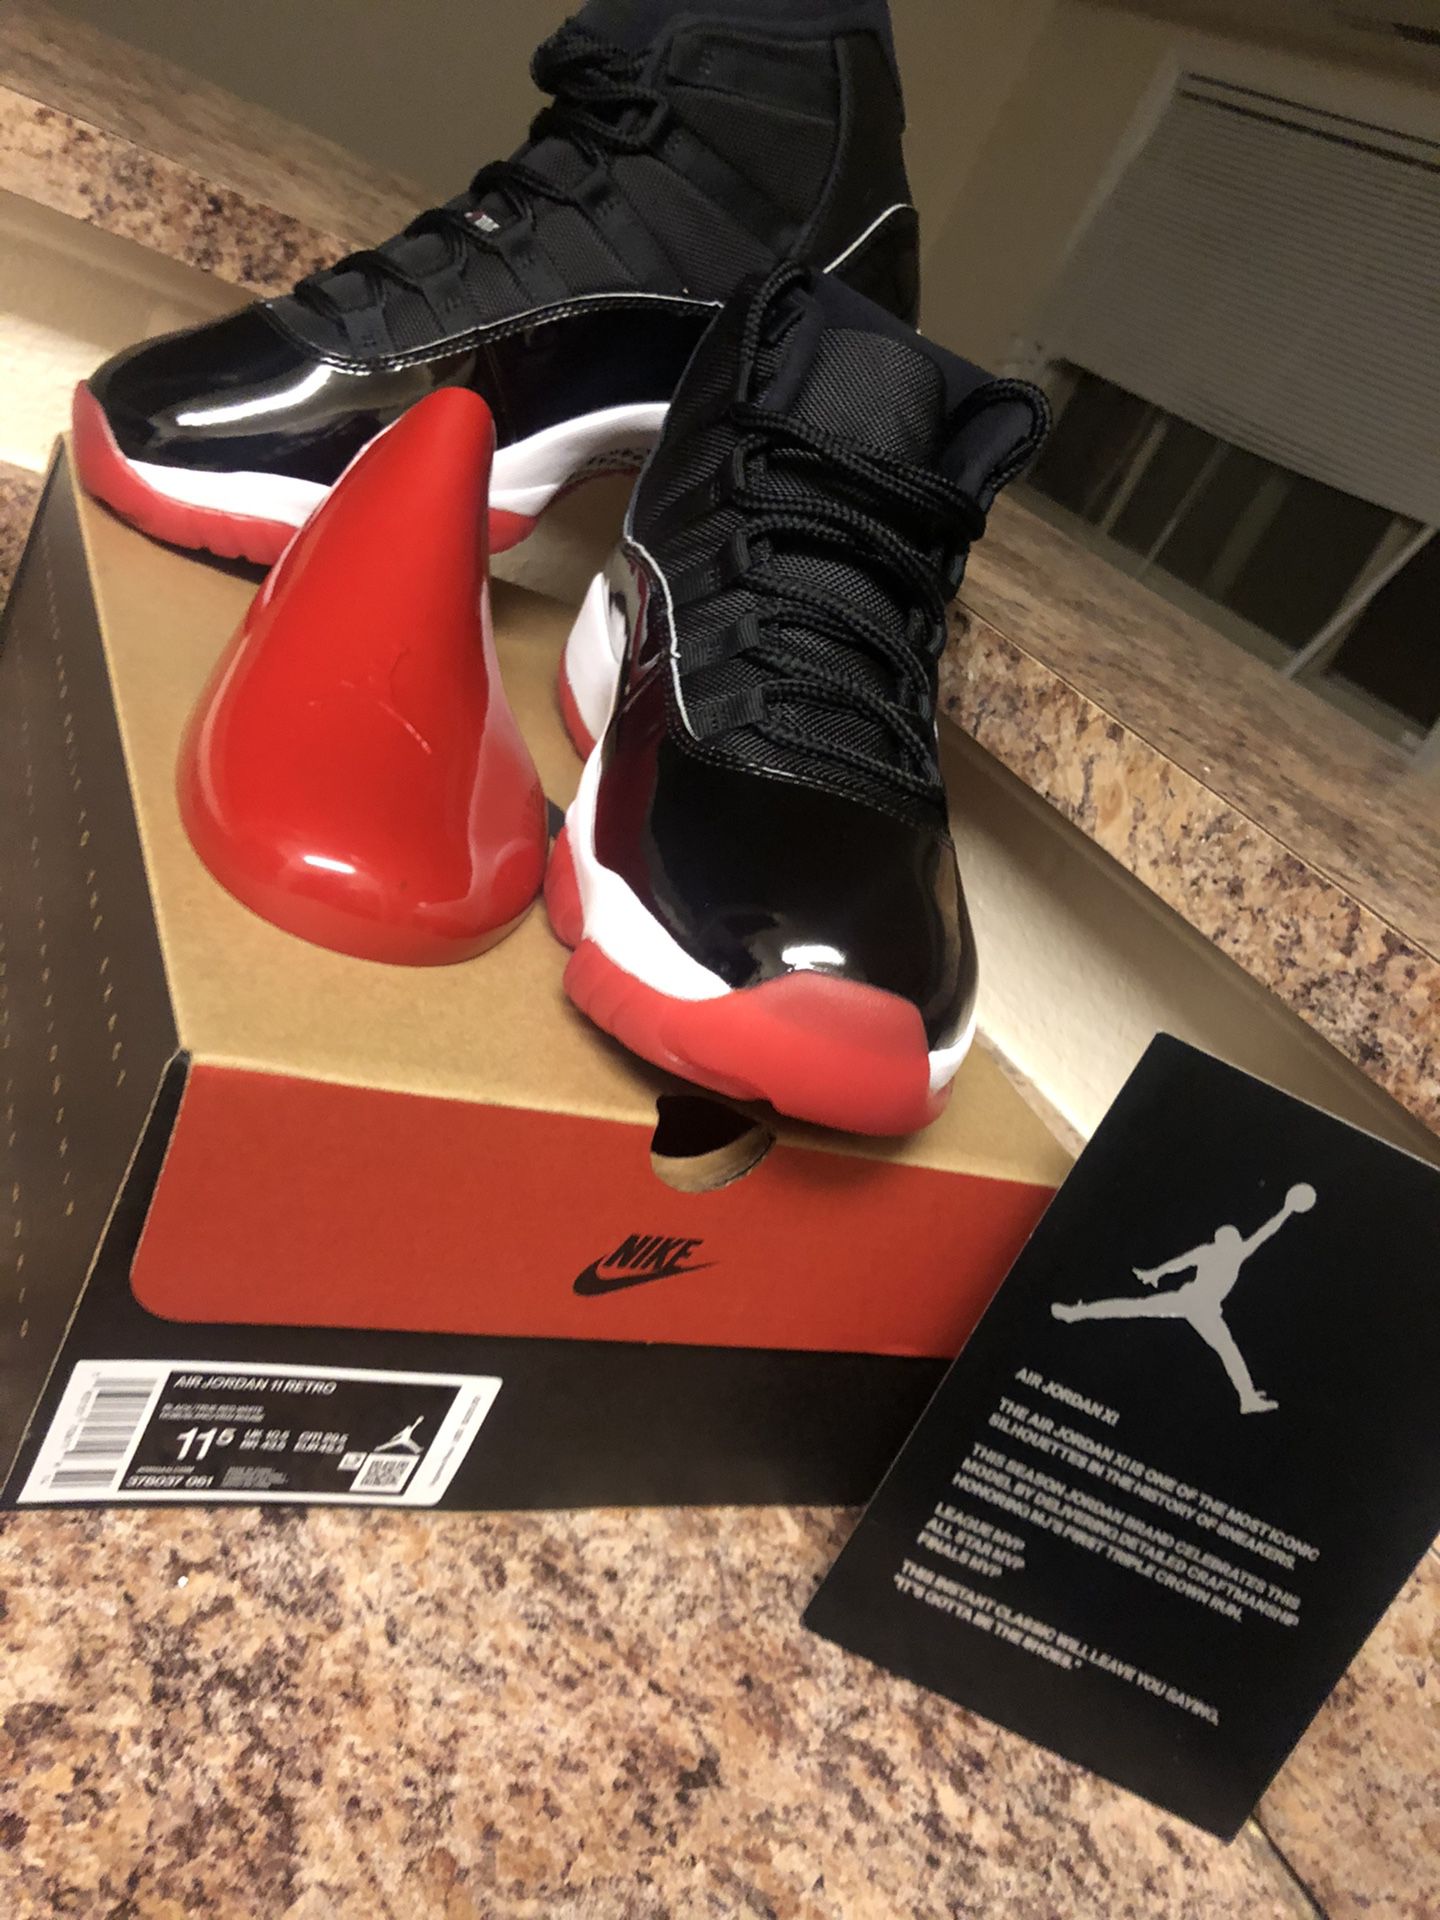 Bred 11s size 11.5